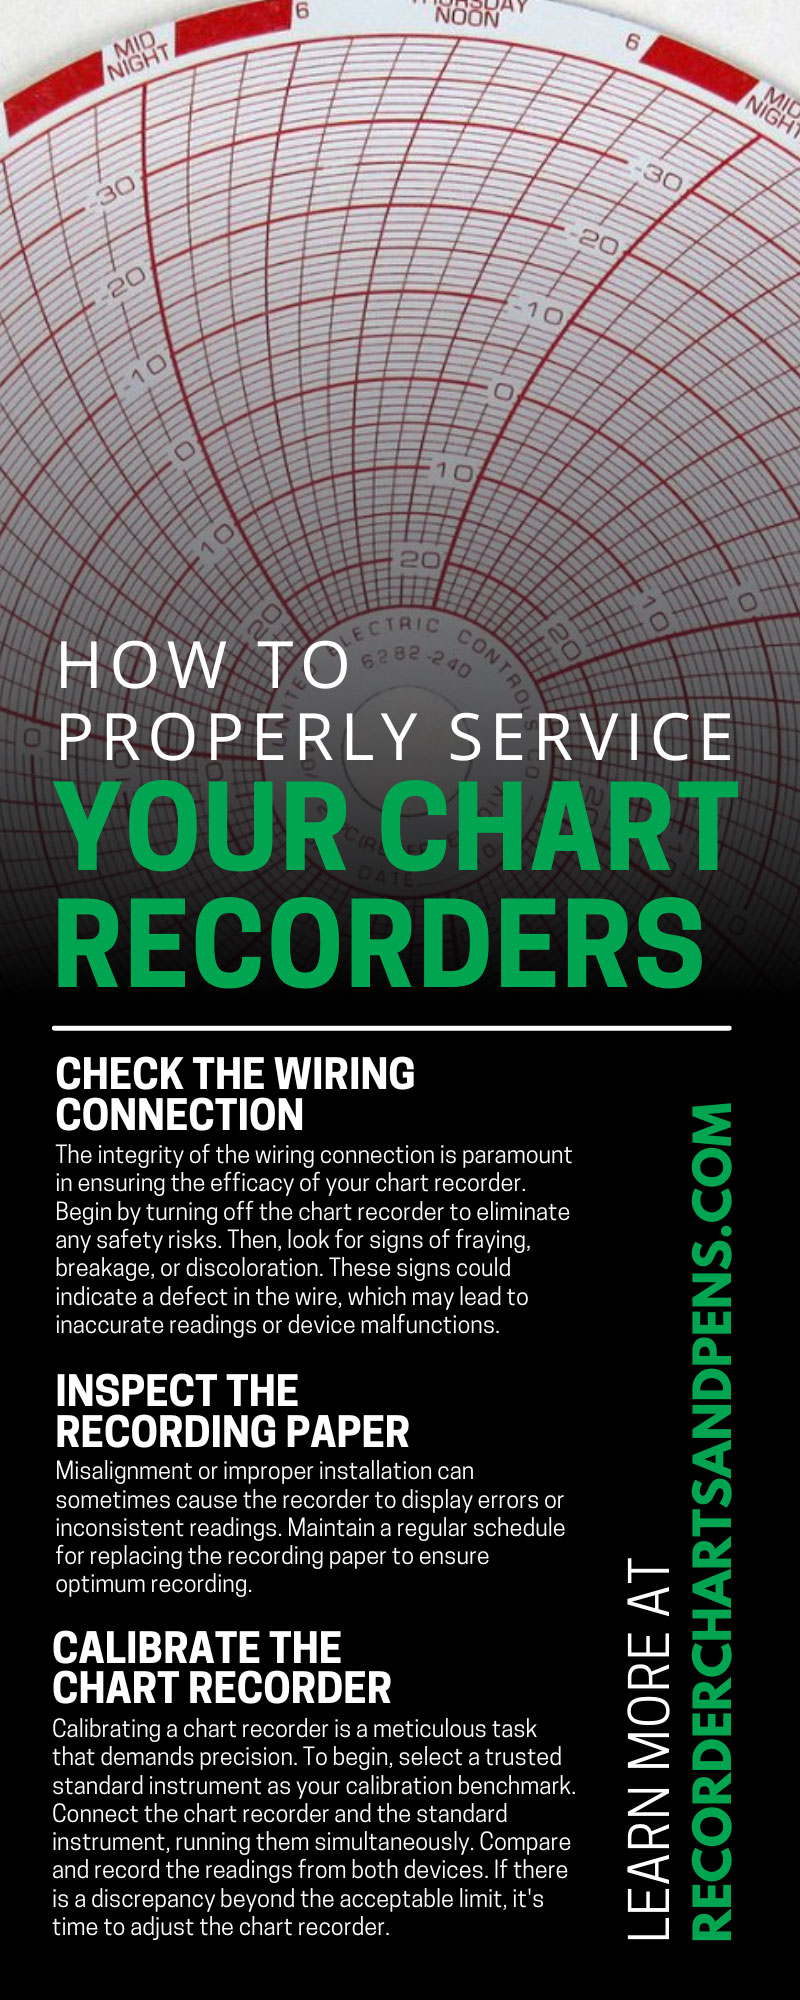 How To Properly Service Your Chart Recorders